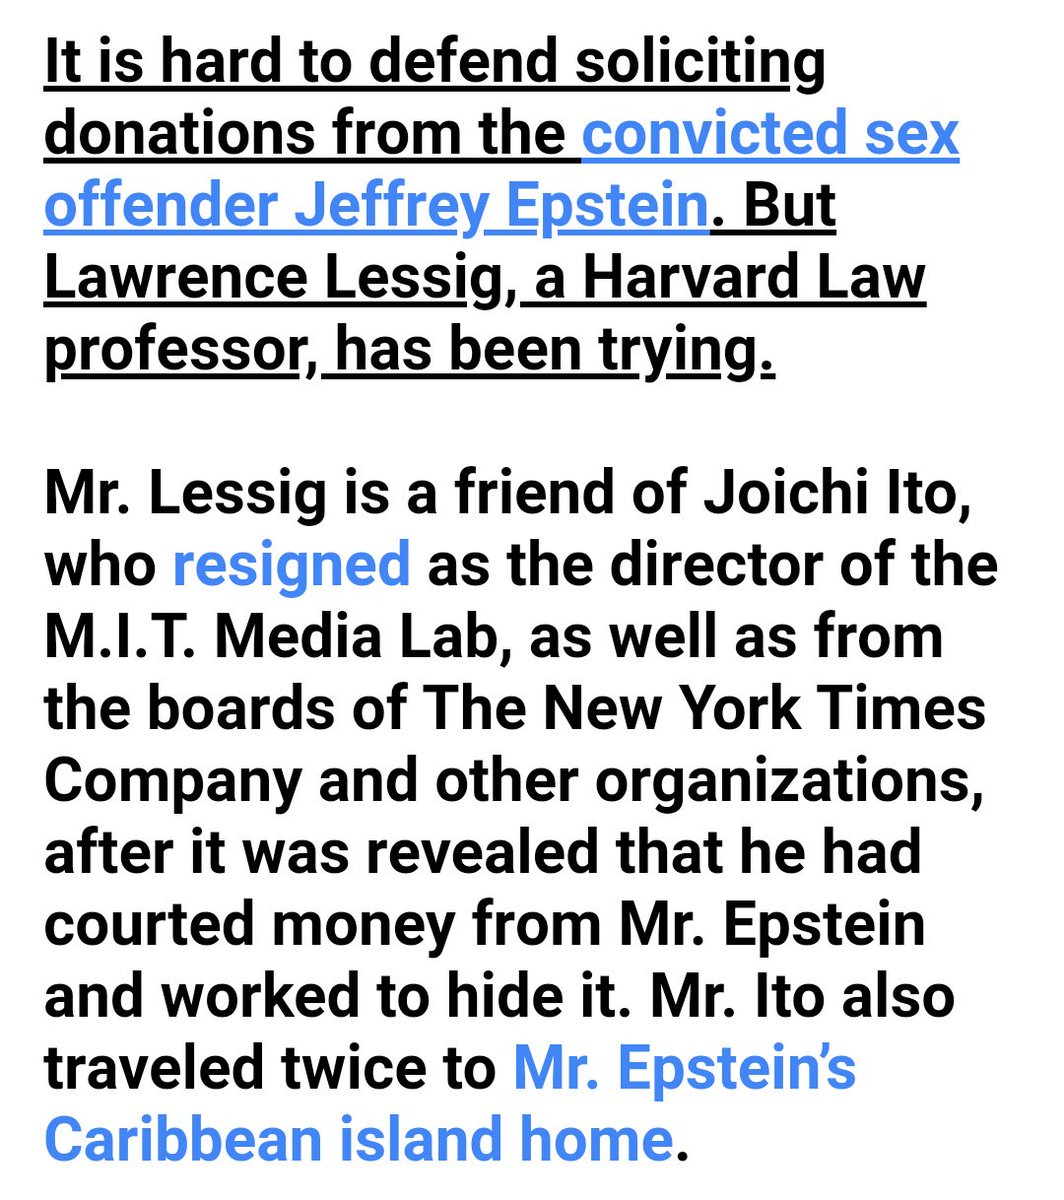 Given the abuse Lessig suffered at school, his essay in defence of acceptance of donations to the M.I.T. Media Lab from the financier and pervert Jeffrey Epstein by his friend Joichi Ito is truly shocking: